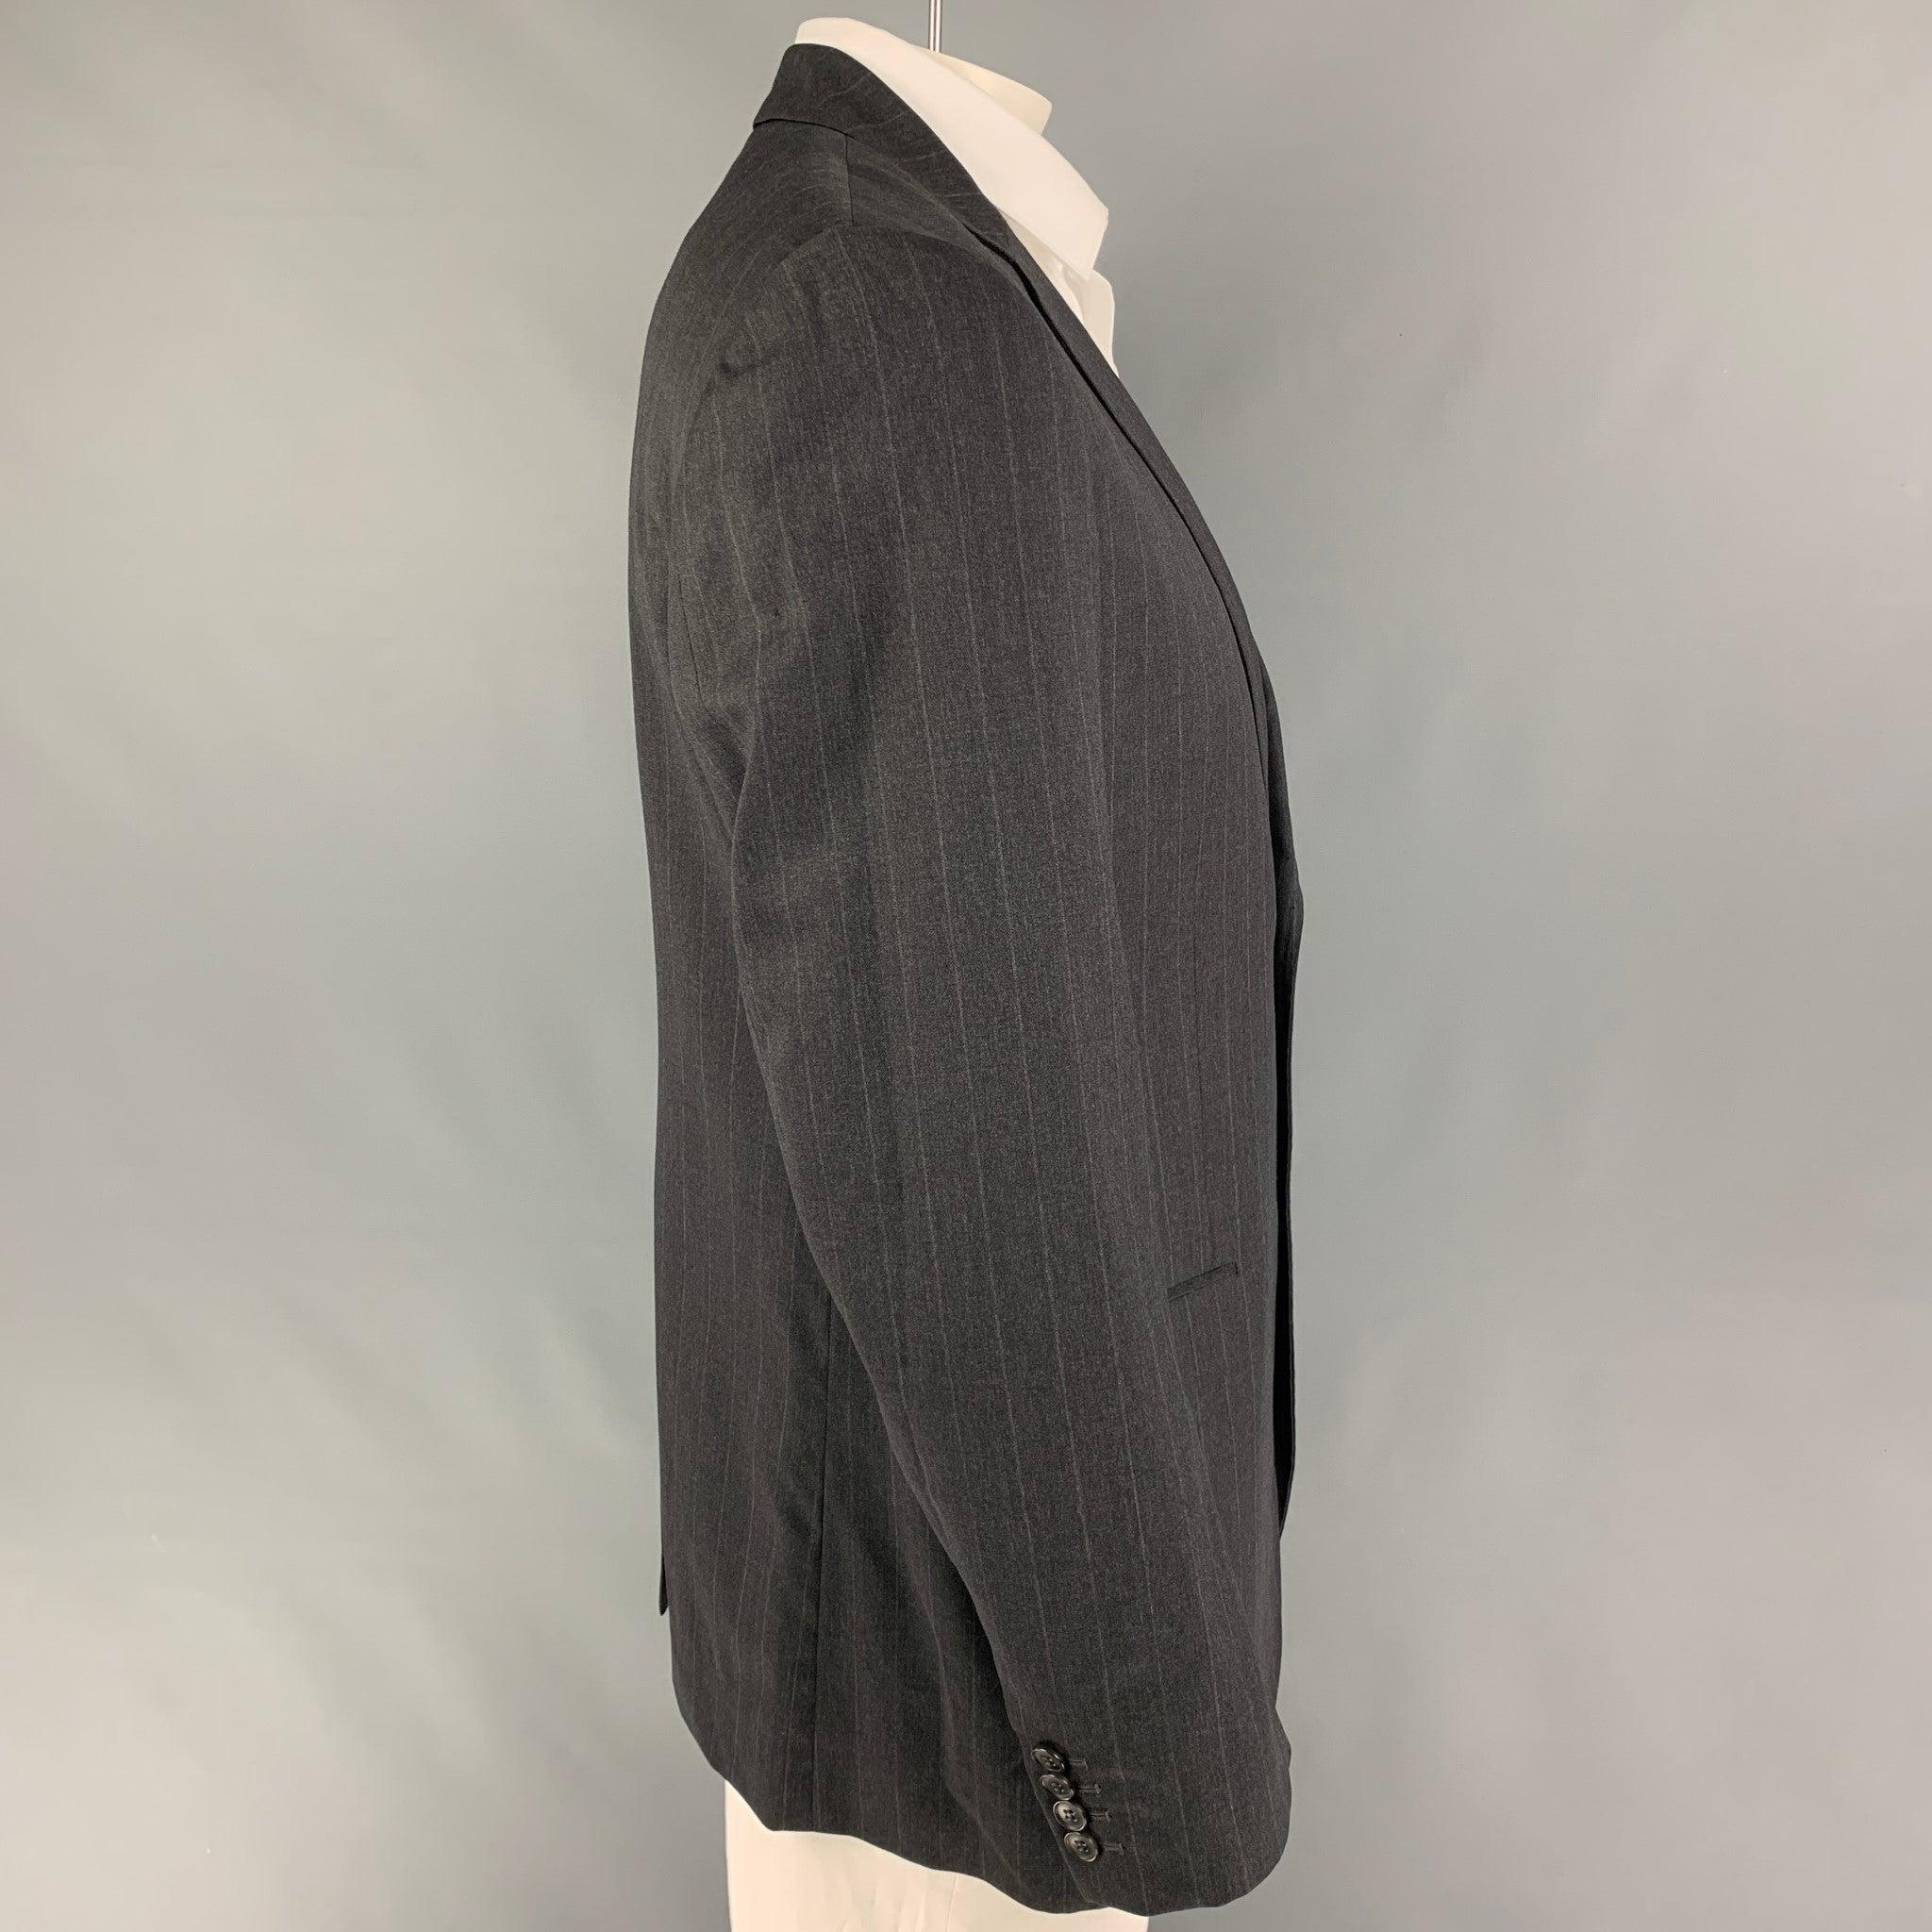 DOLCE & GABBANA
sport coat comes in a charcoal pinstripe virgin wool with a full liner featuring a notch lapel, flap pockets, single back vent, and a double button closure. Made in Italy. Very Good Pre-Owned Condition. 

Marked:   54 

Measurements: